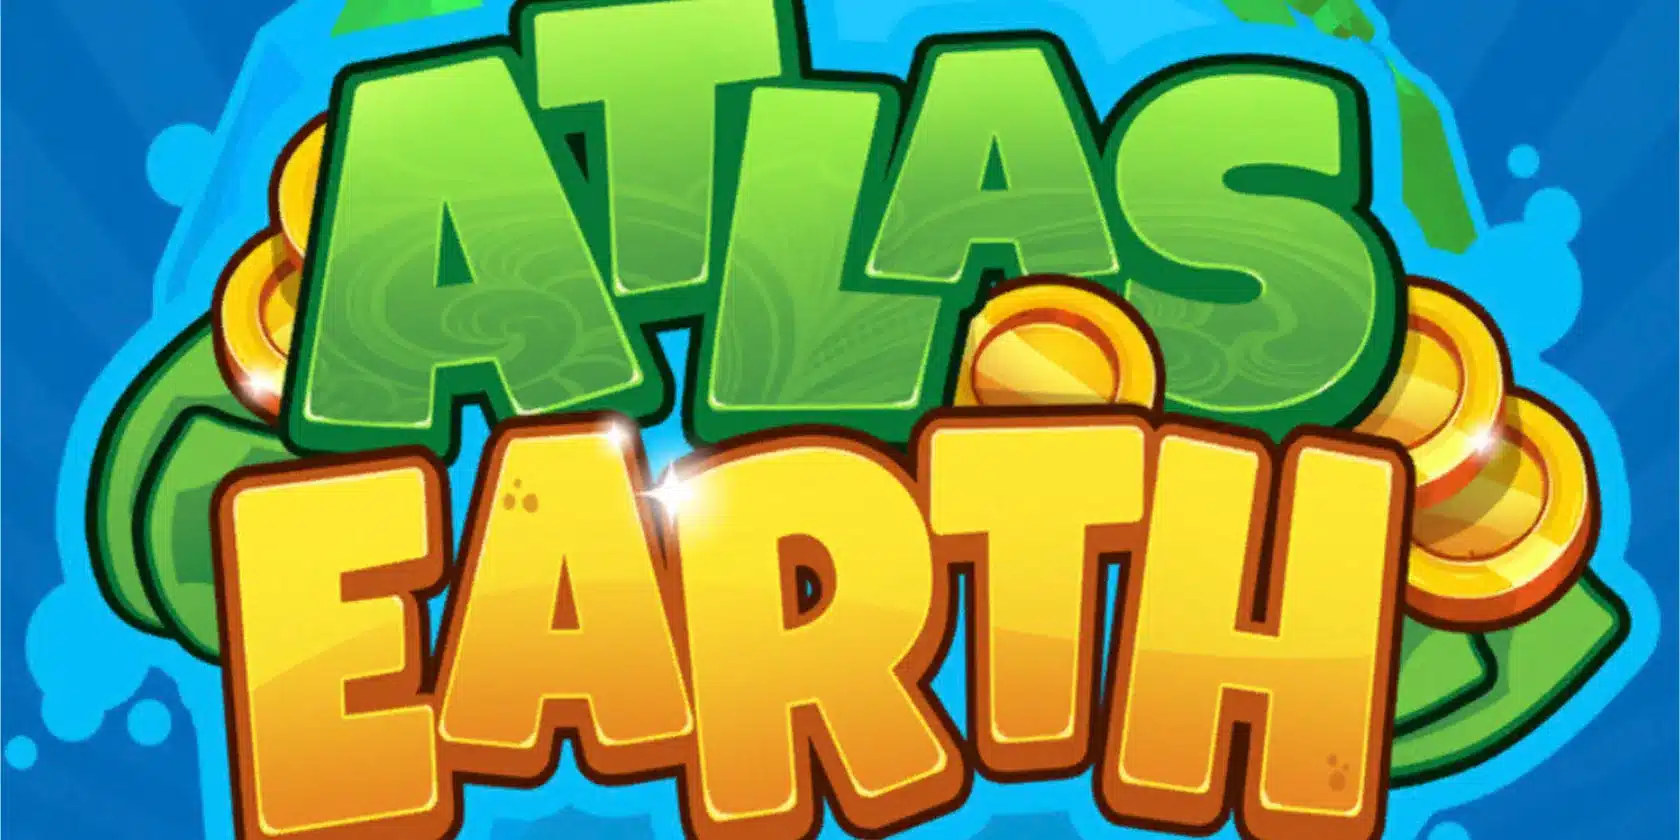 Atlas Earth: Virtual Land Investment or Scam?